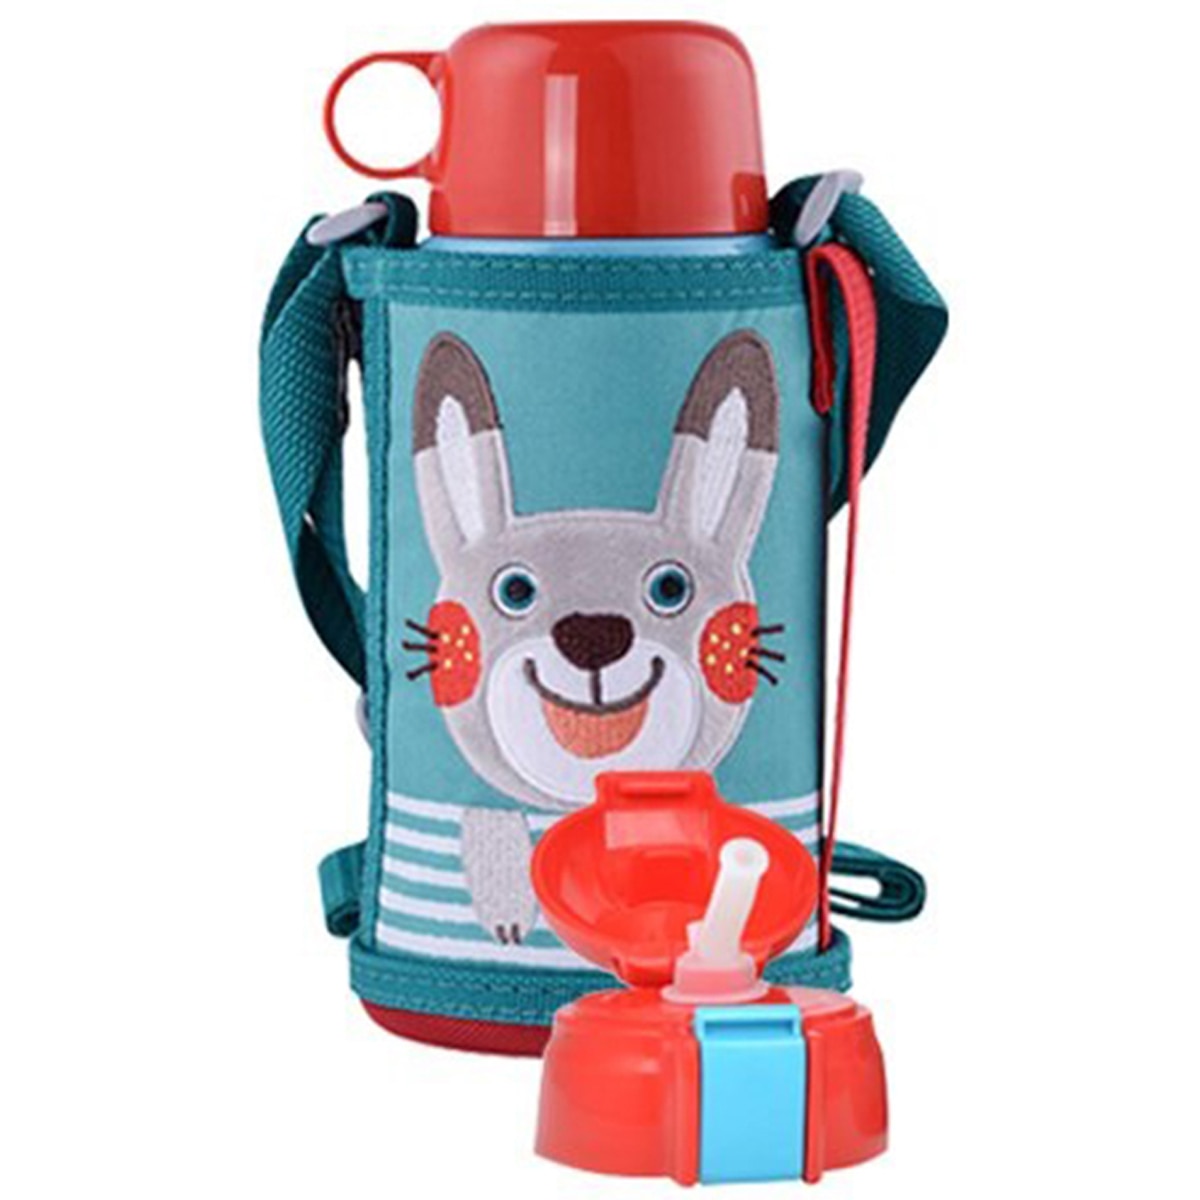 Tiger Stainless Steel Children's Kids Thermal Cup Mug Bottle - Bunny